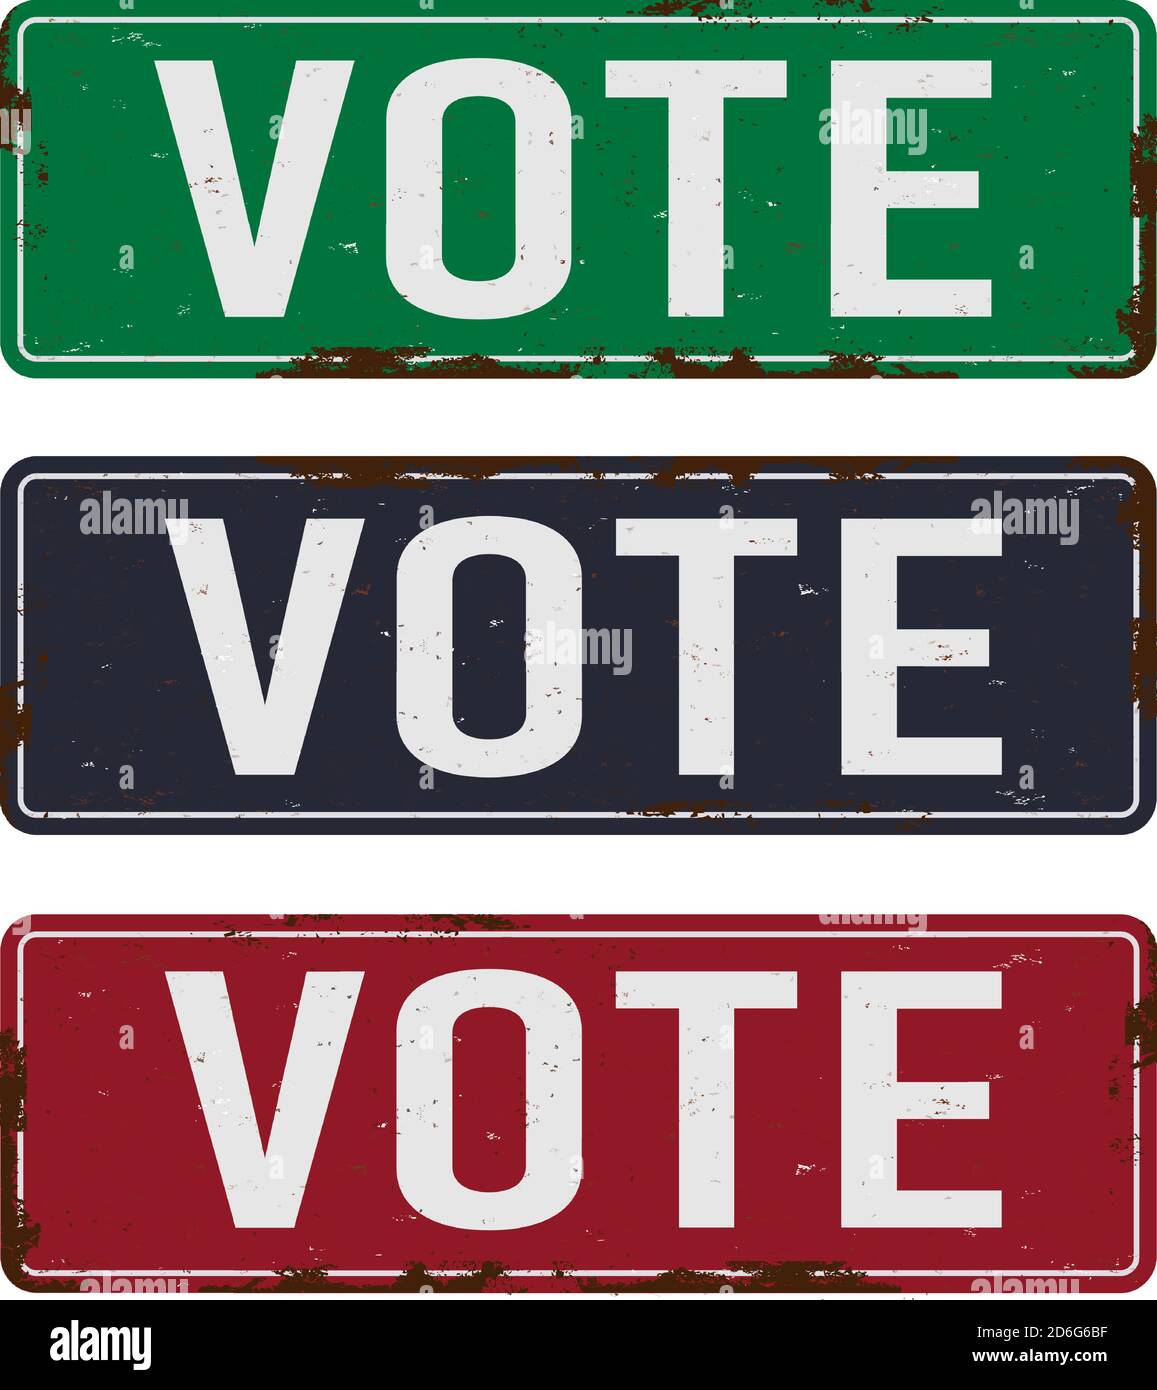 Vote - Presidential Election Poster METAL VINTAGE SIGN Stock Vector